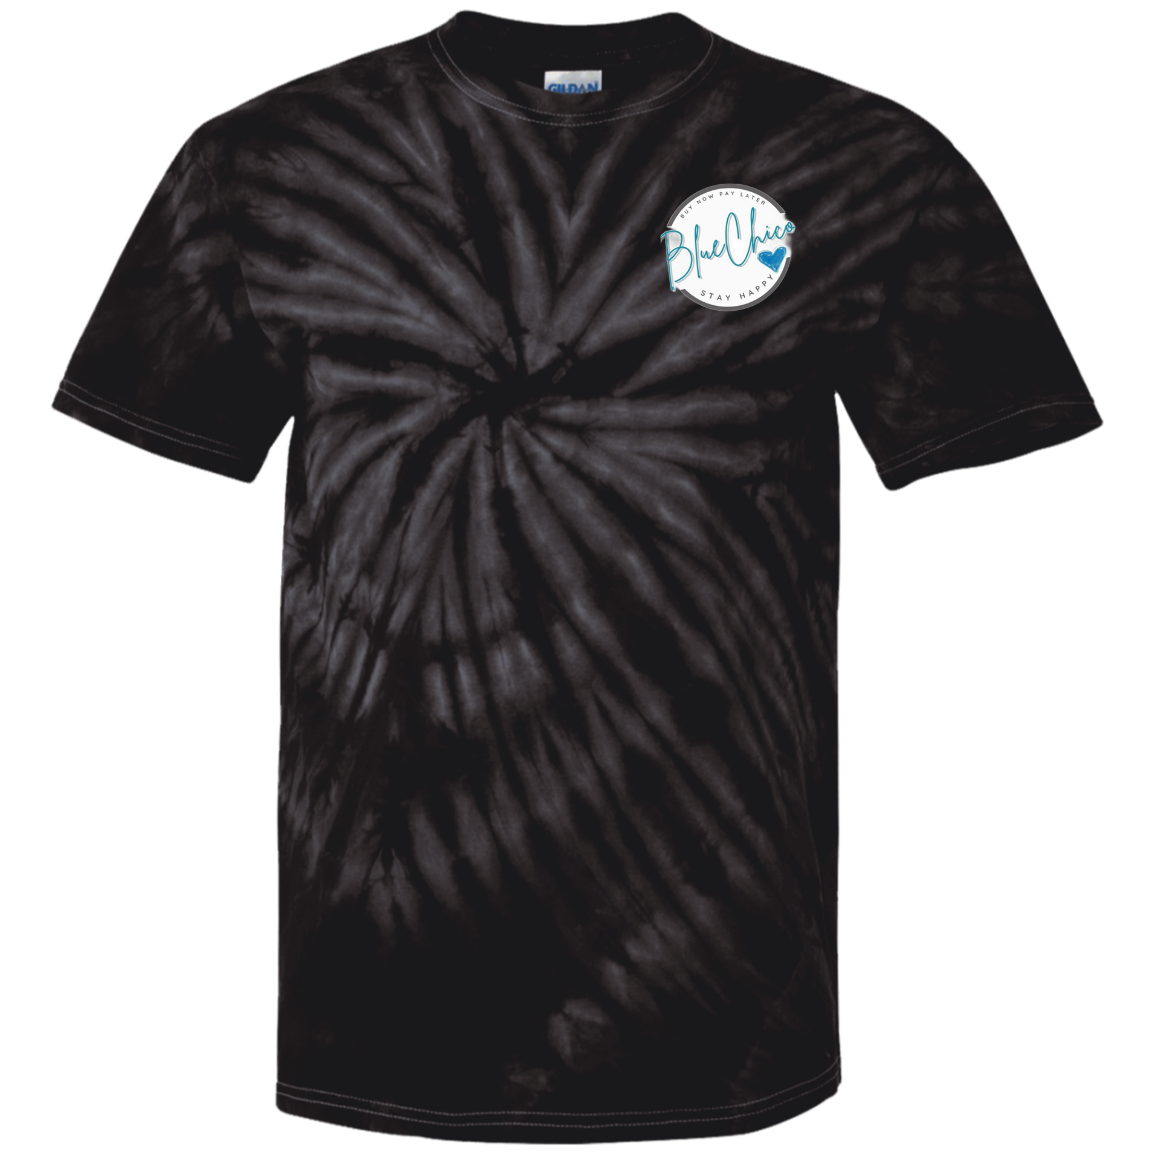 Blue Chico Youth Tie Dye T-Shirt